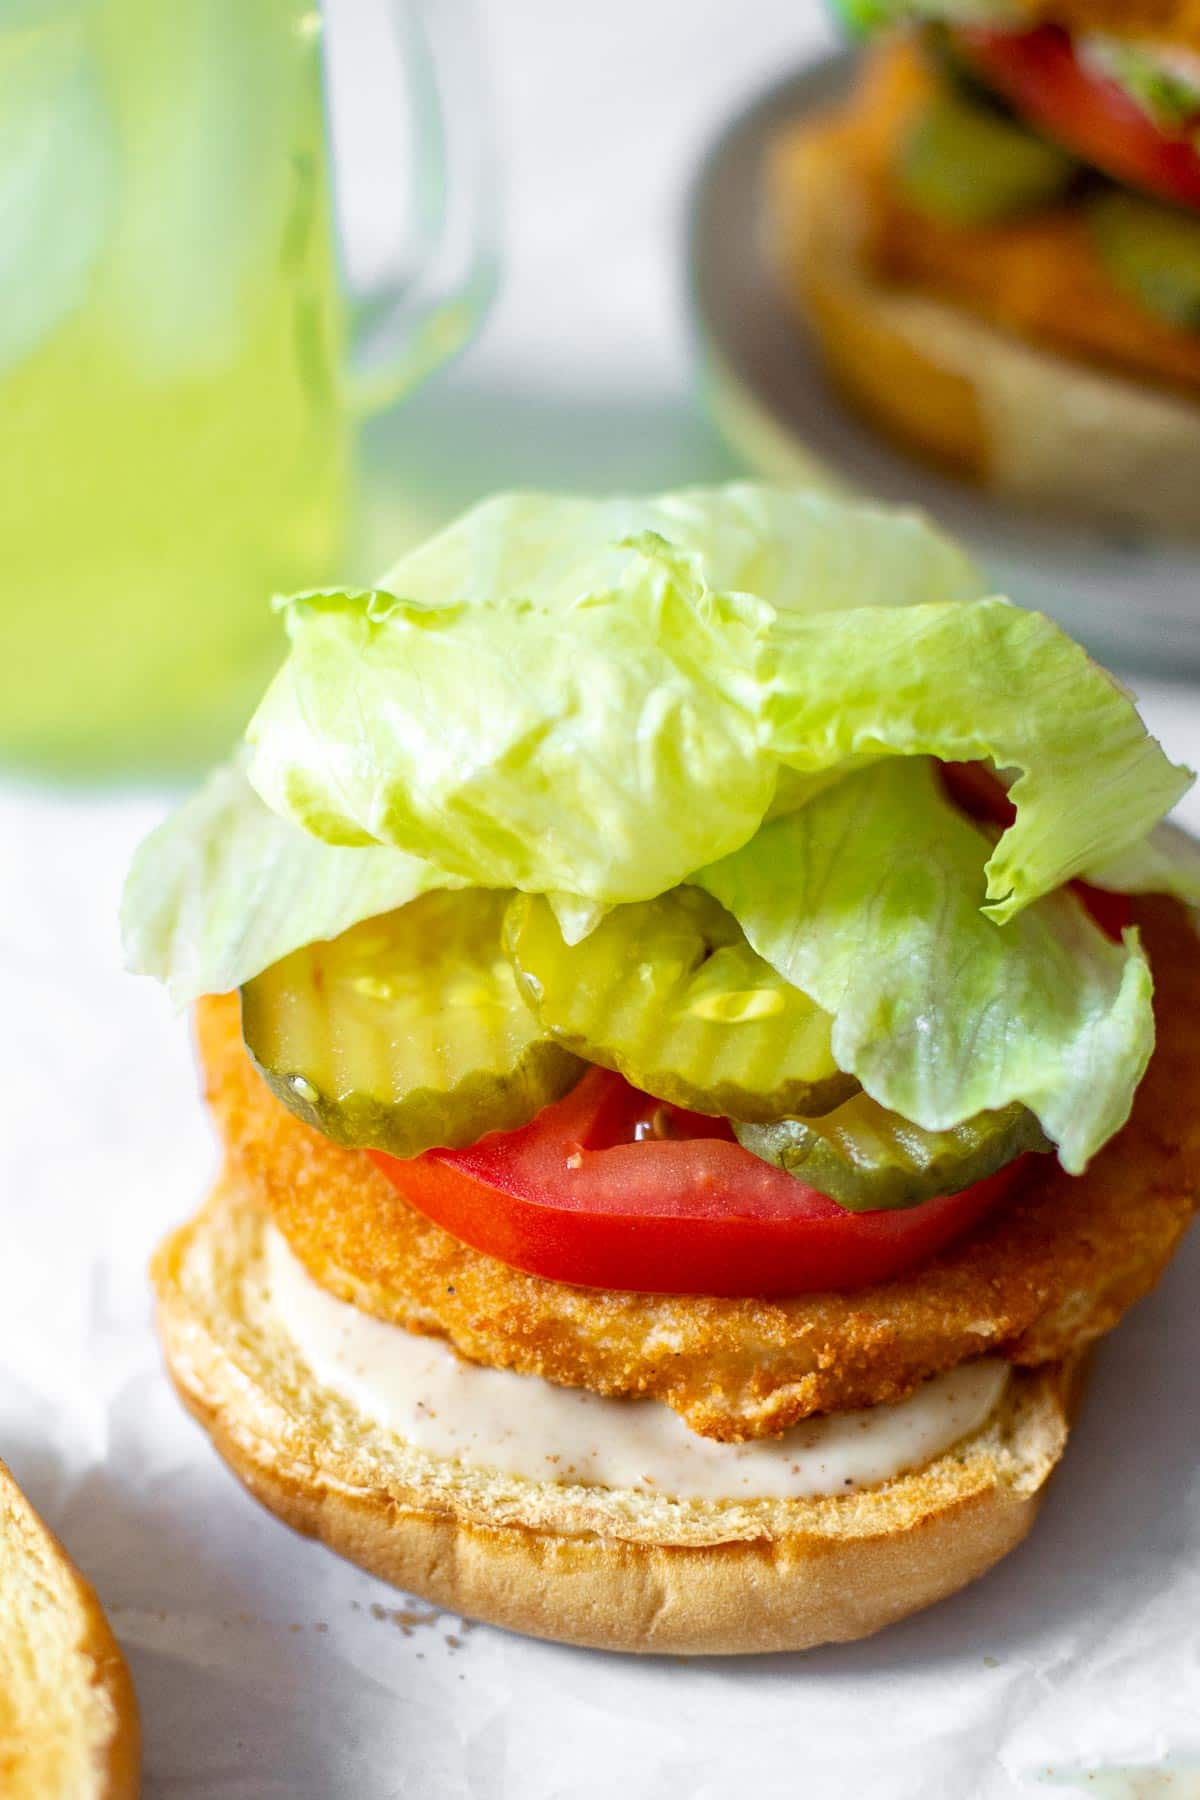 Air fryer chicken burger with toppings and no top bun